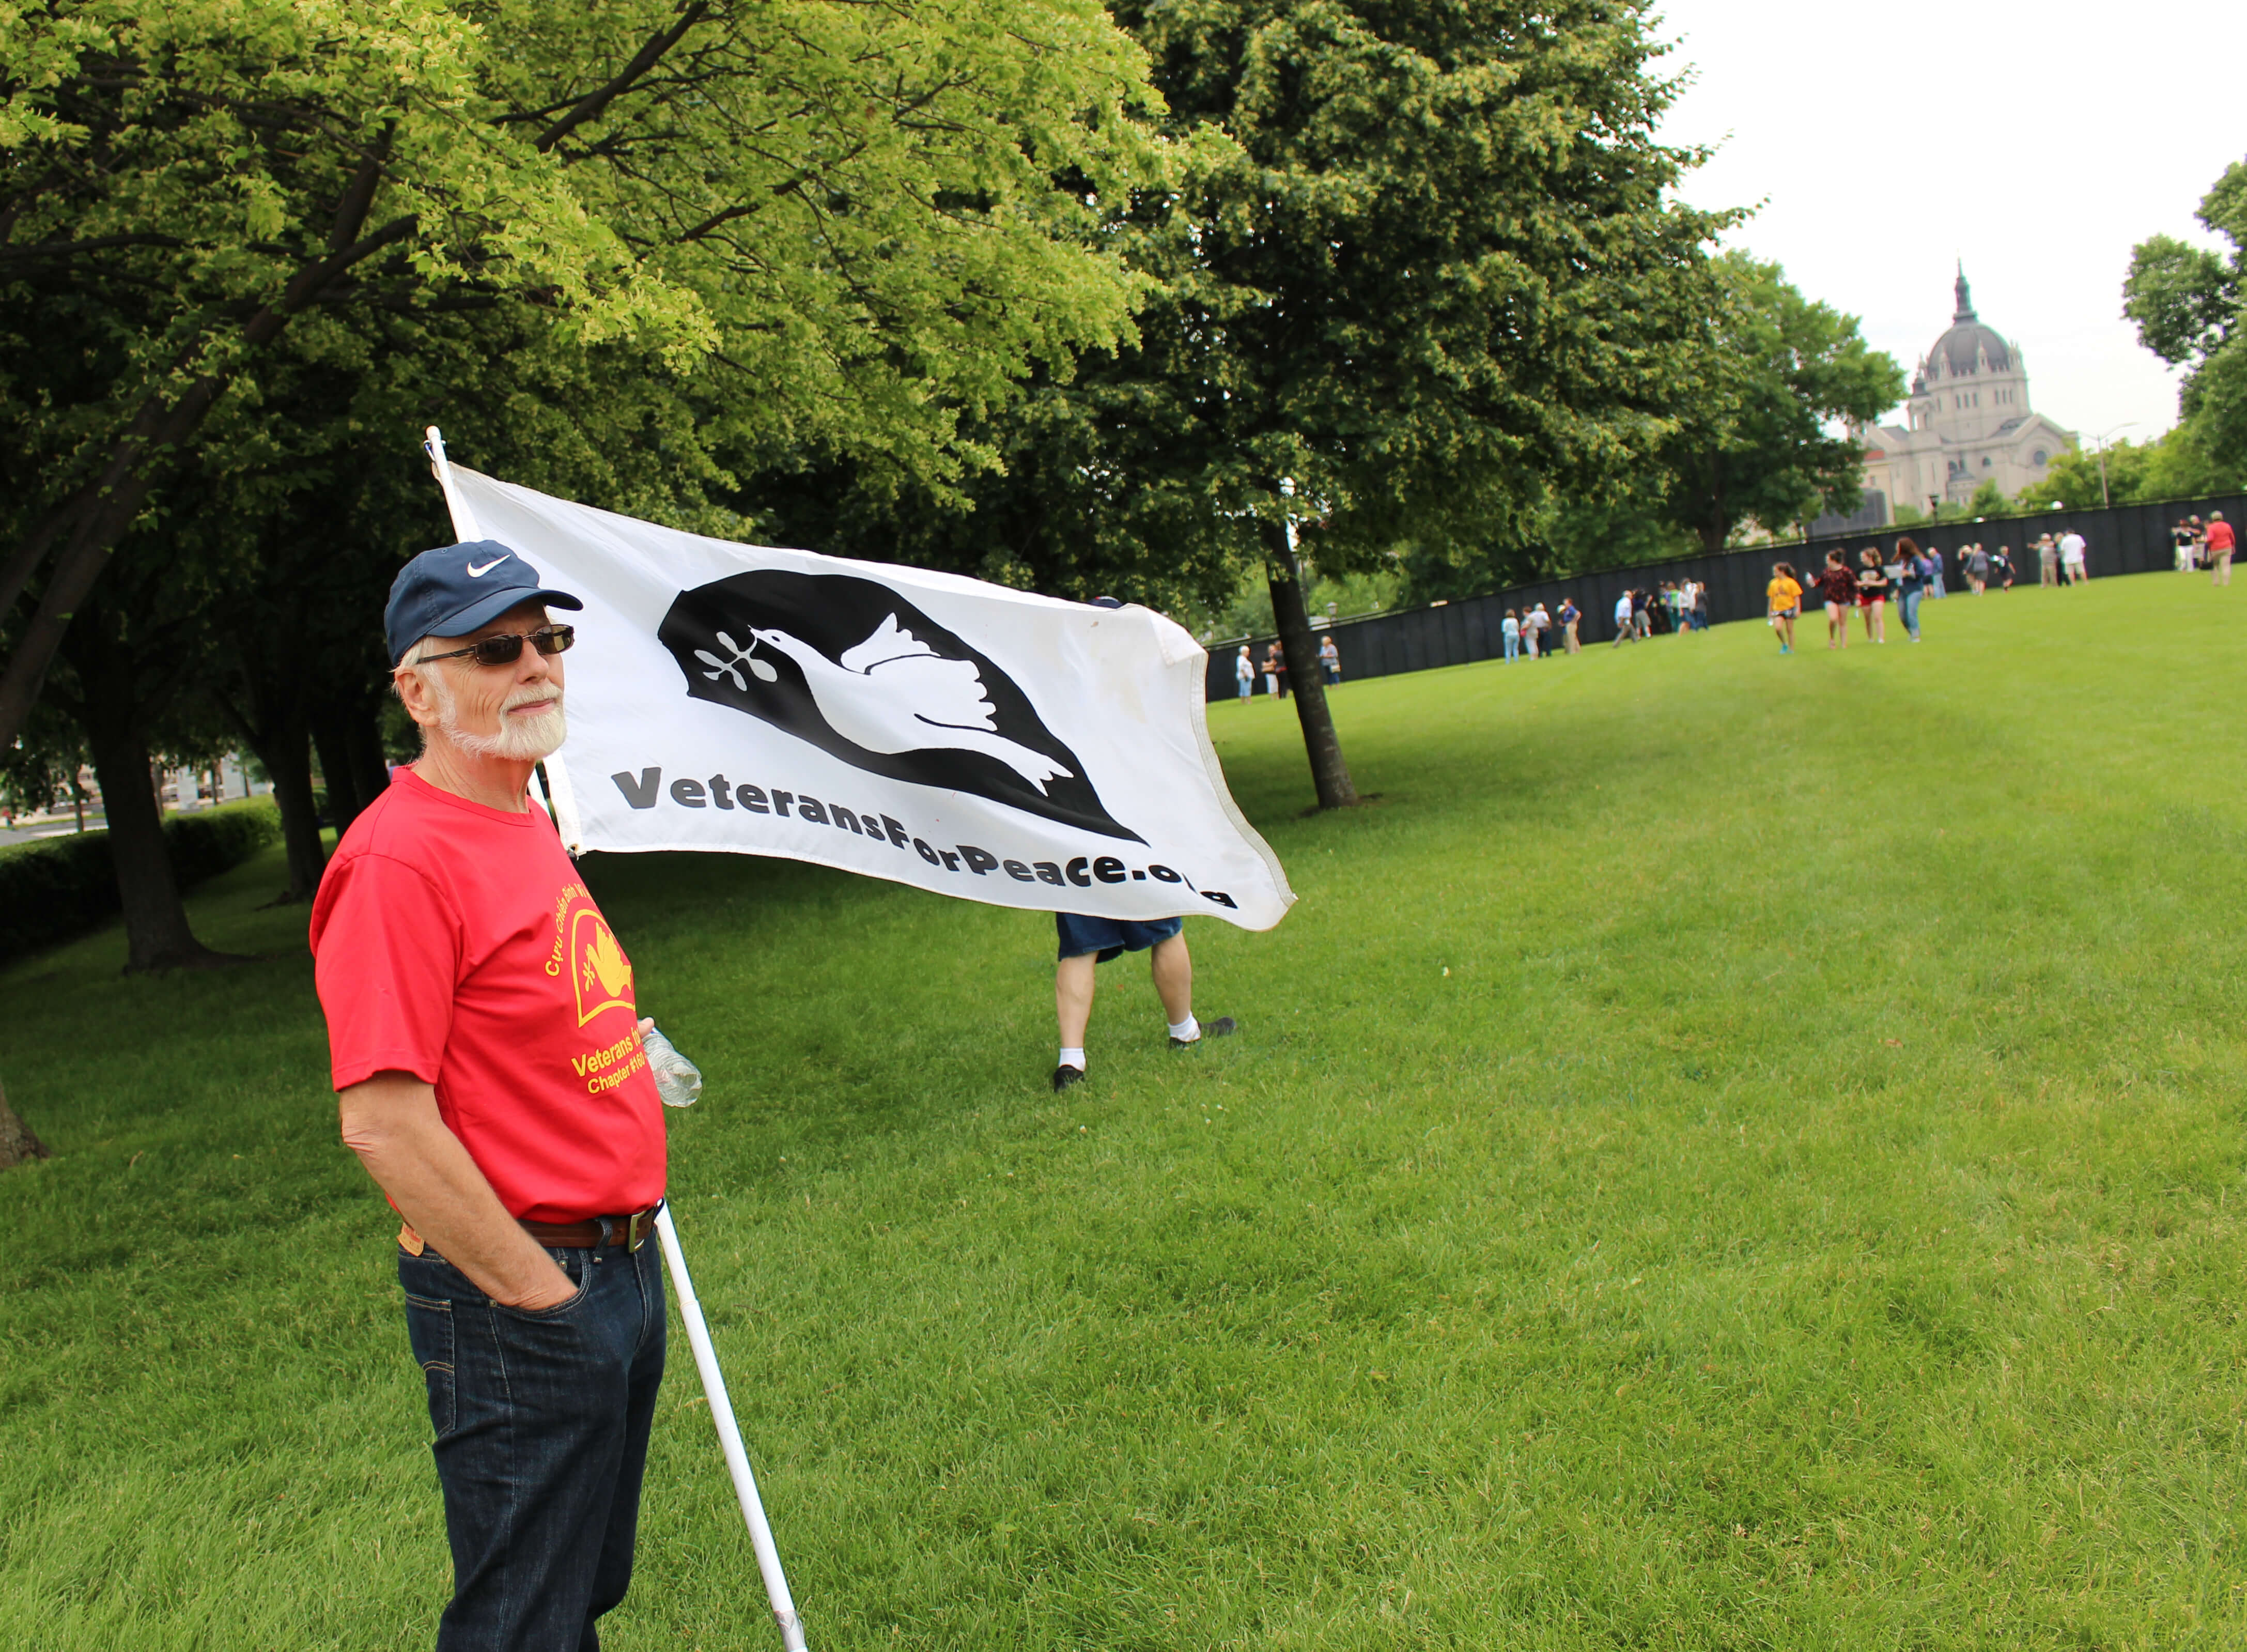 Man in red shirt holding a Veterans for Peace flag.